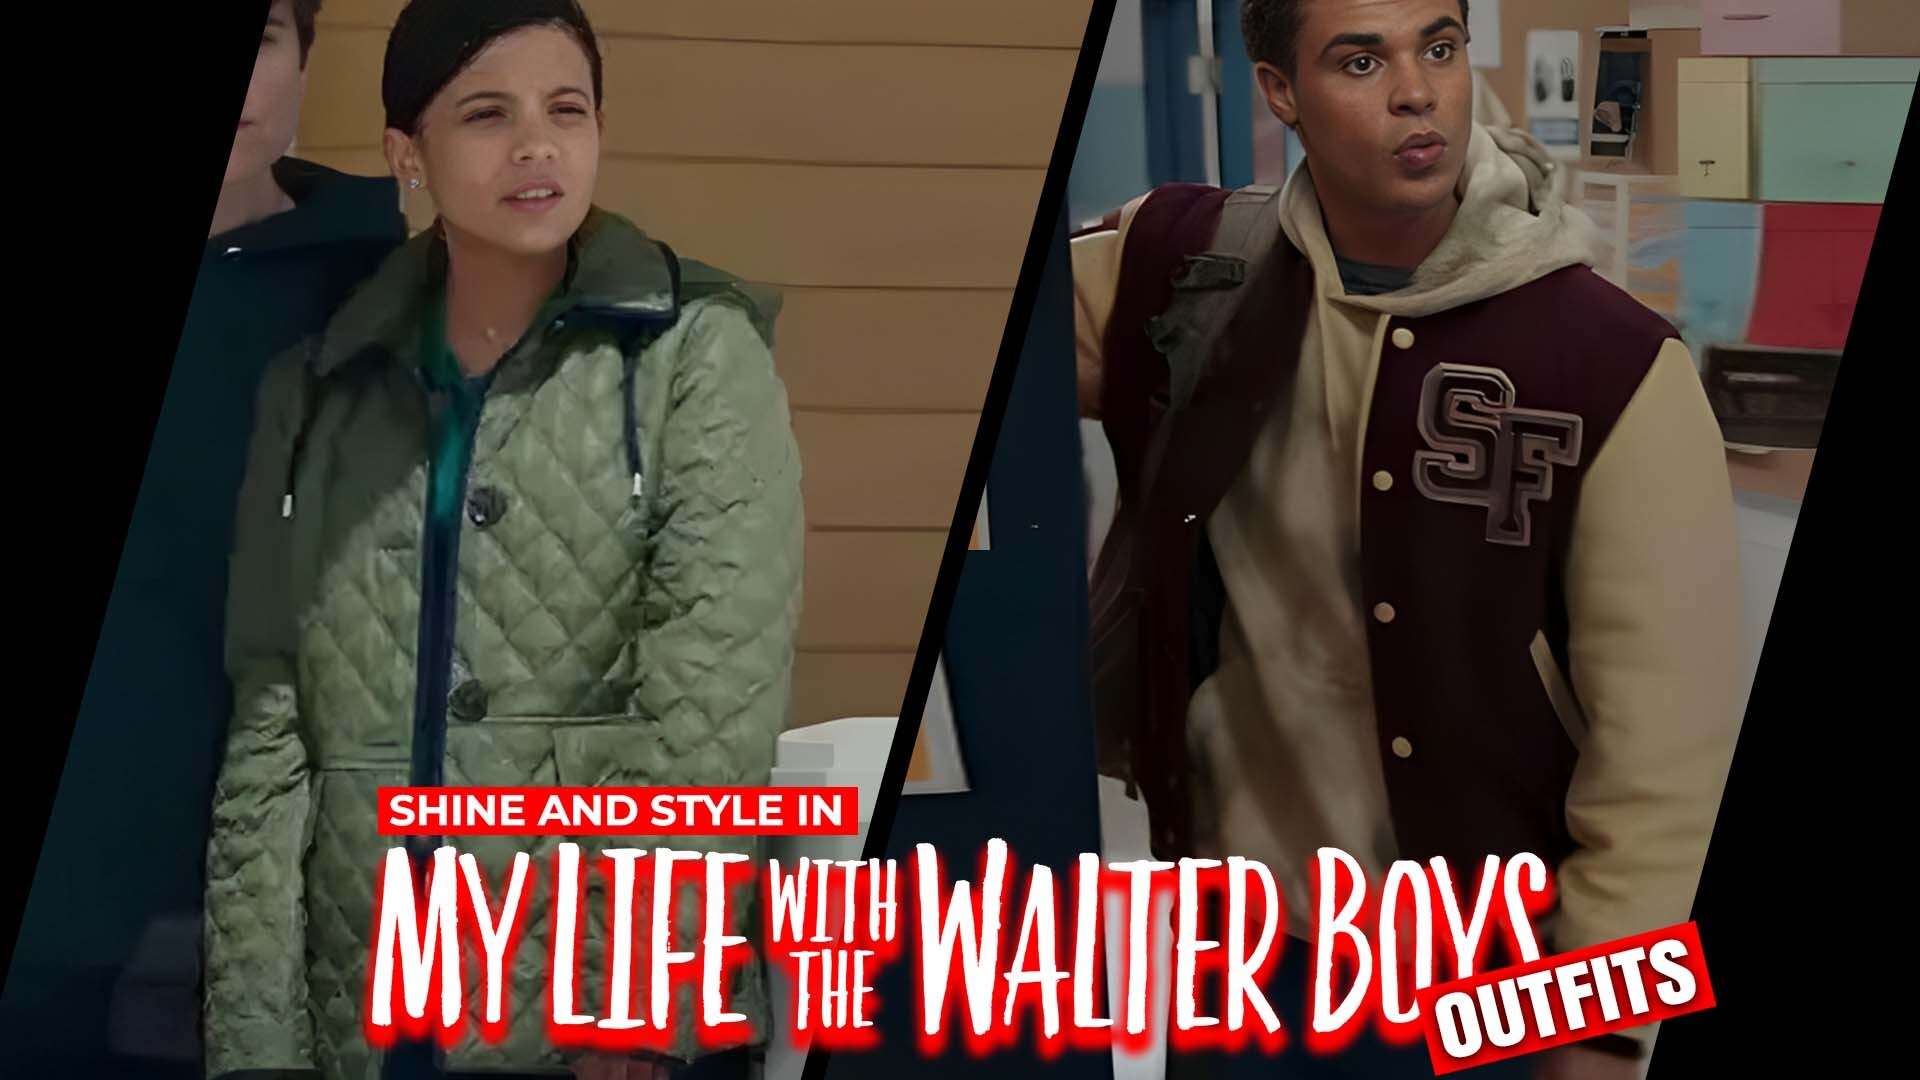 Shine And Style In My Life With The Walter Boys Outfits